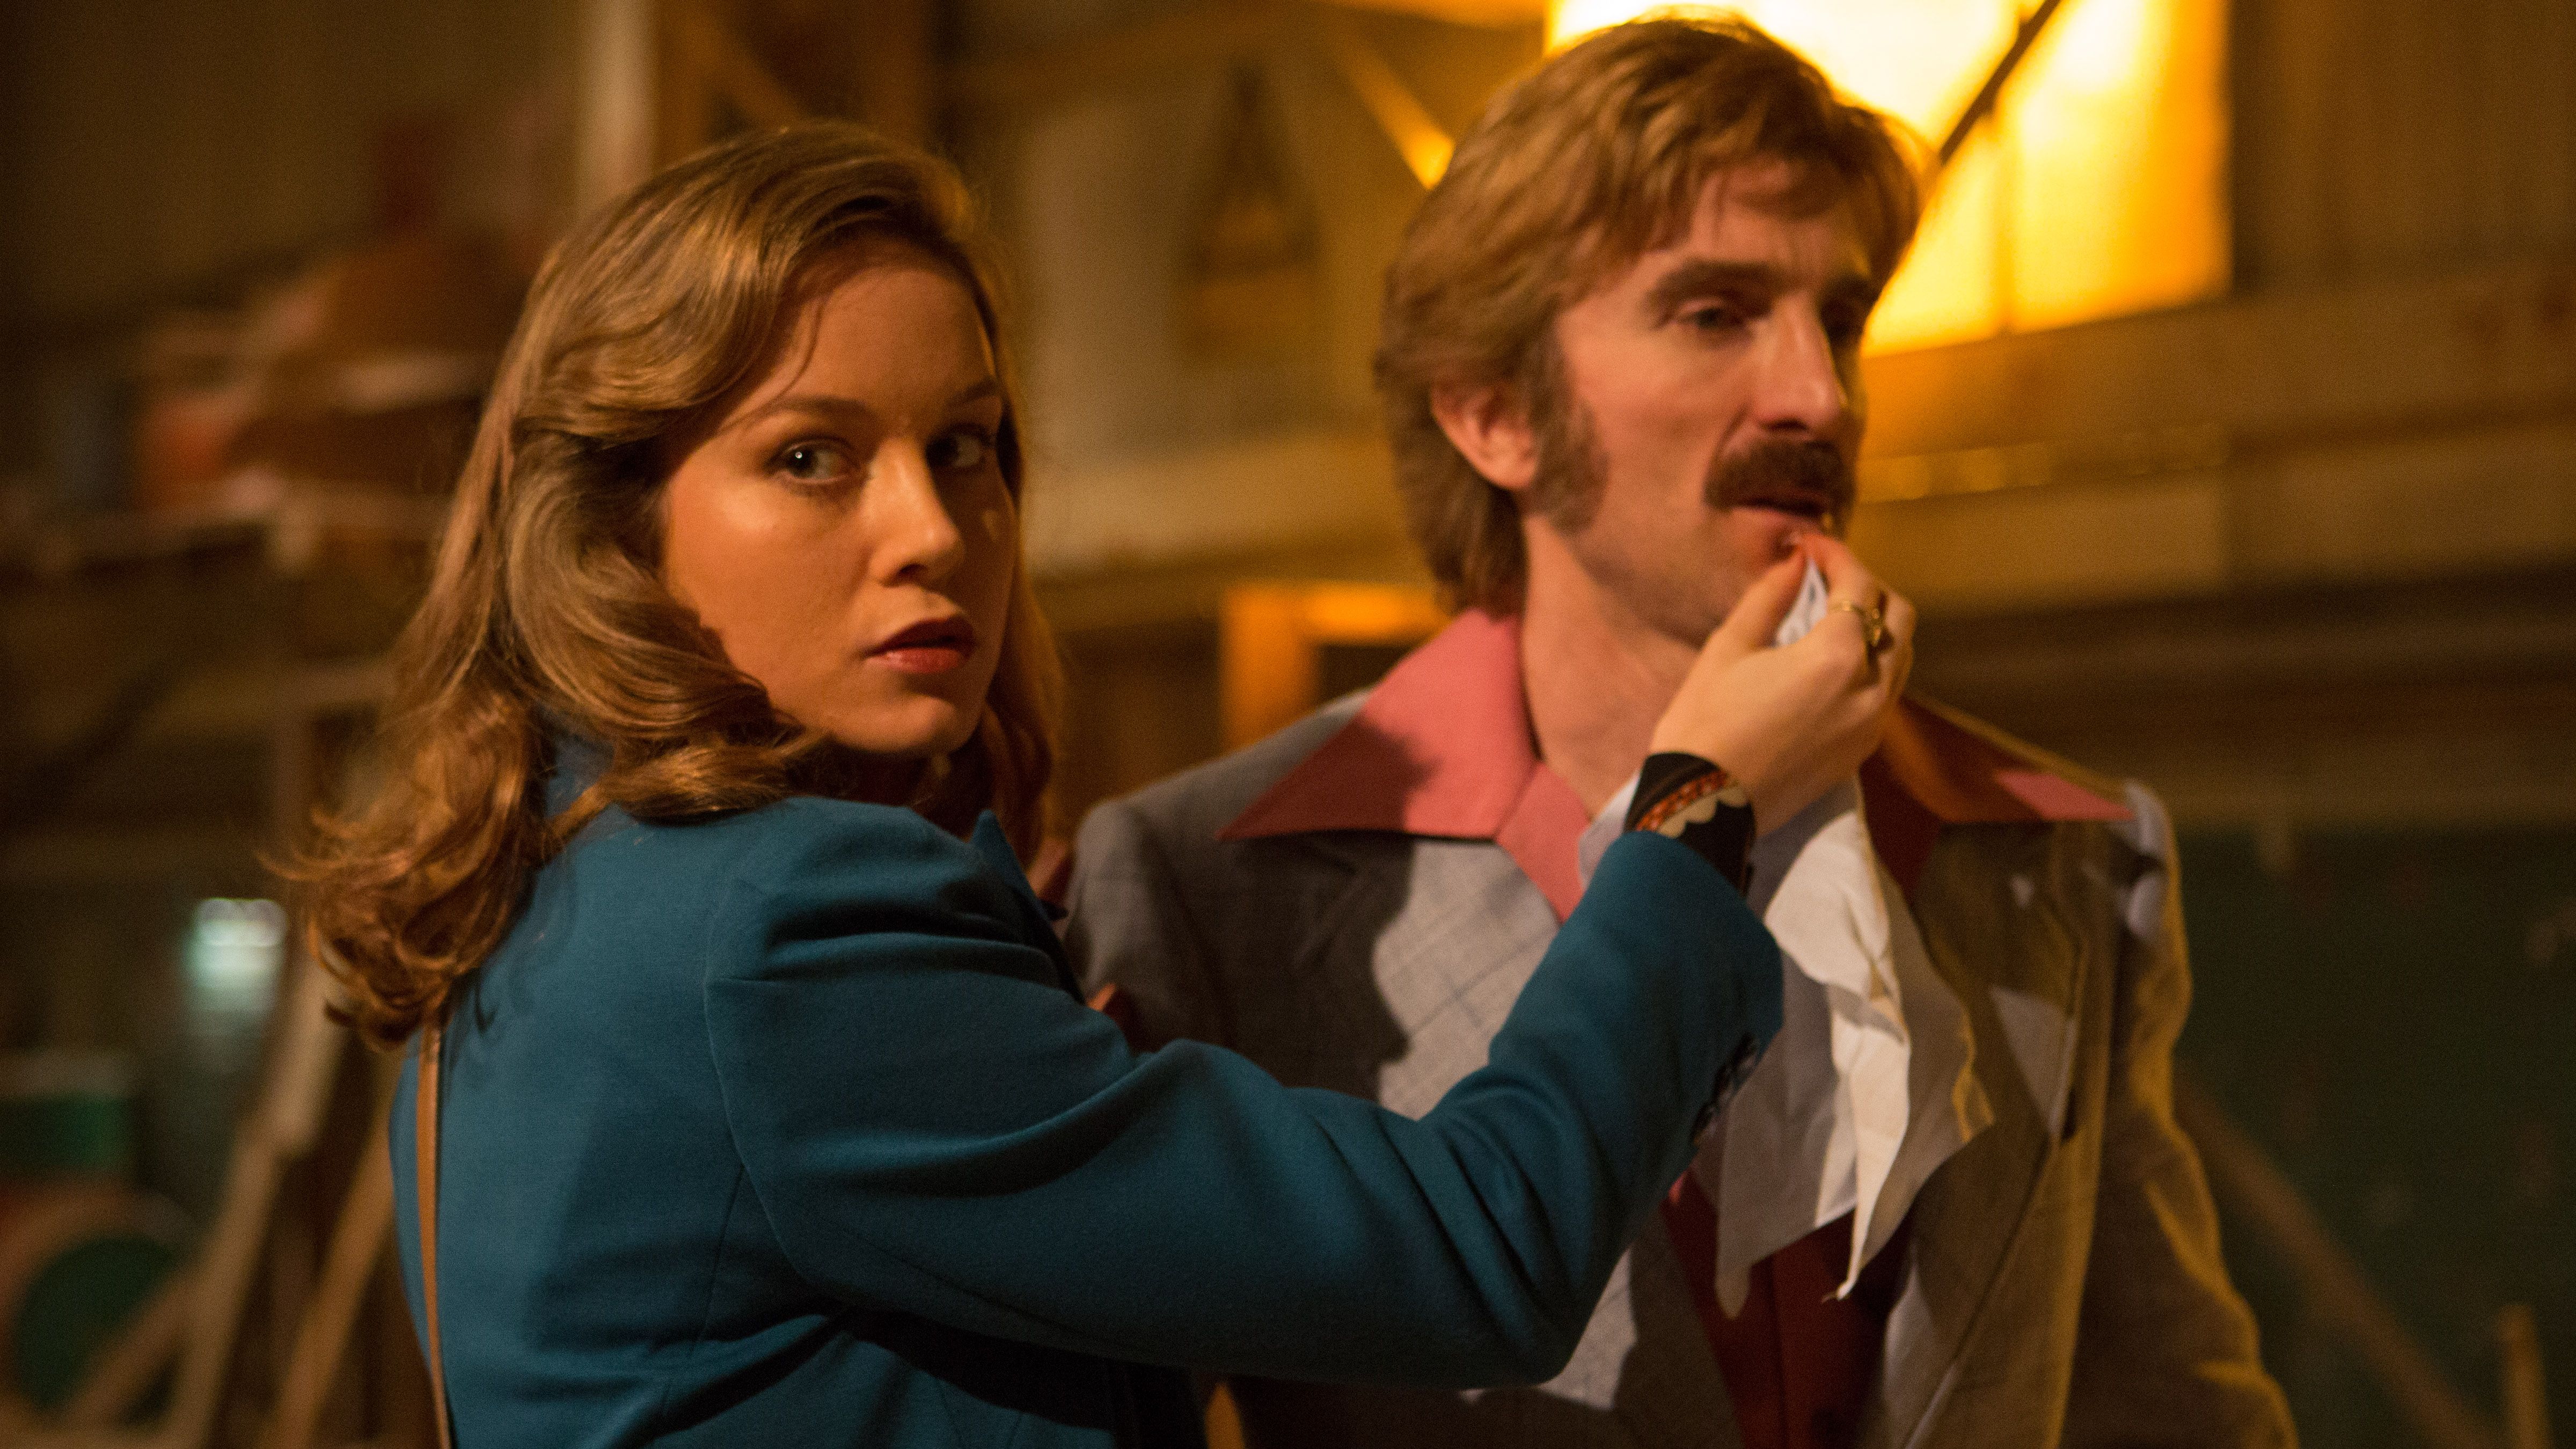 Free Fire Review: Ben Wheatley's Film Shoots to Thrill ...